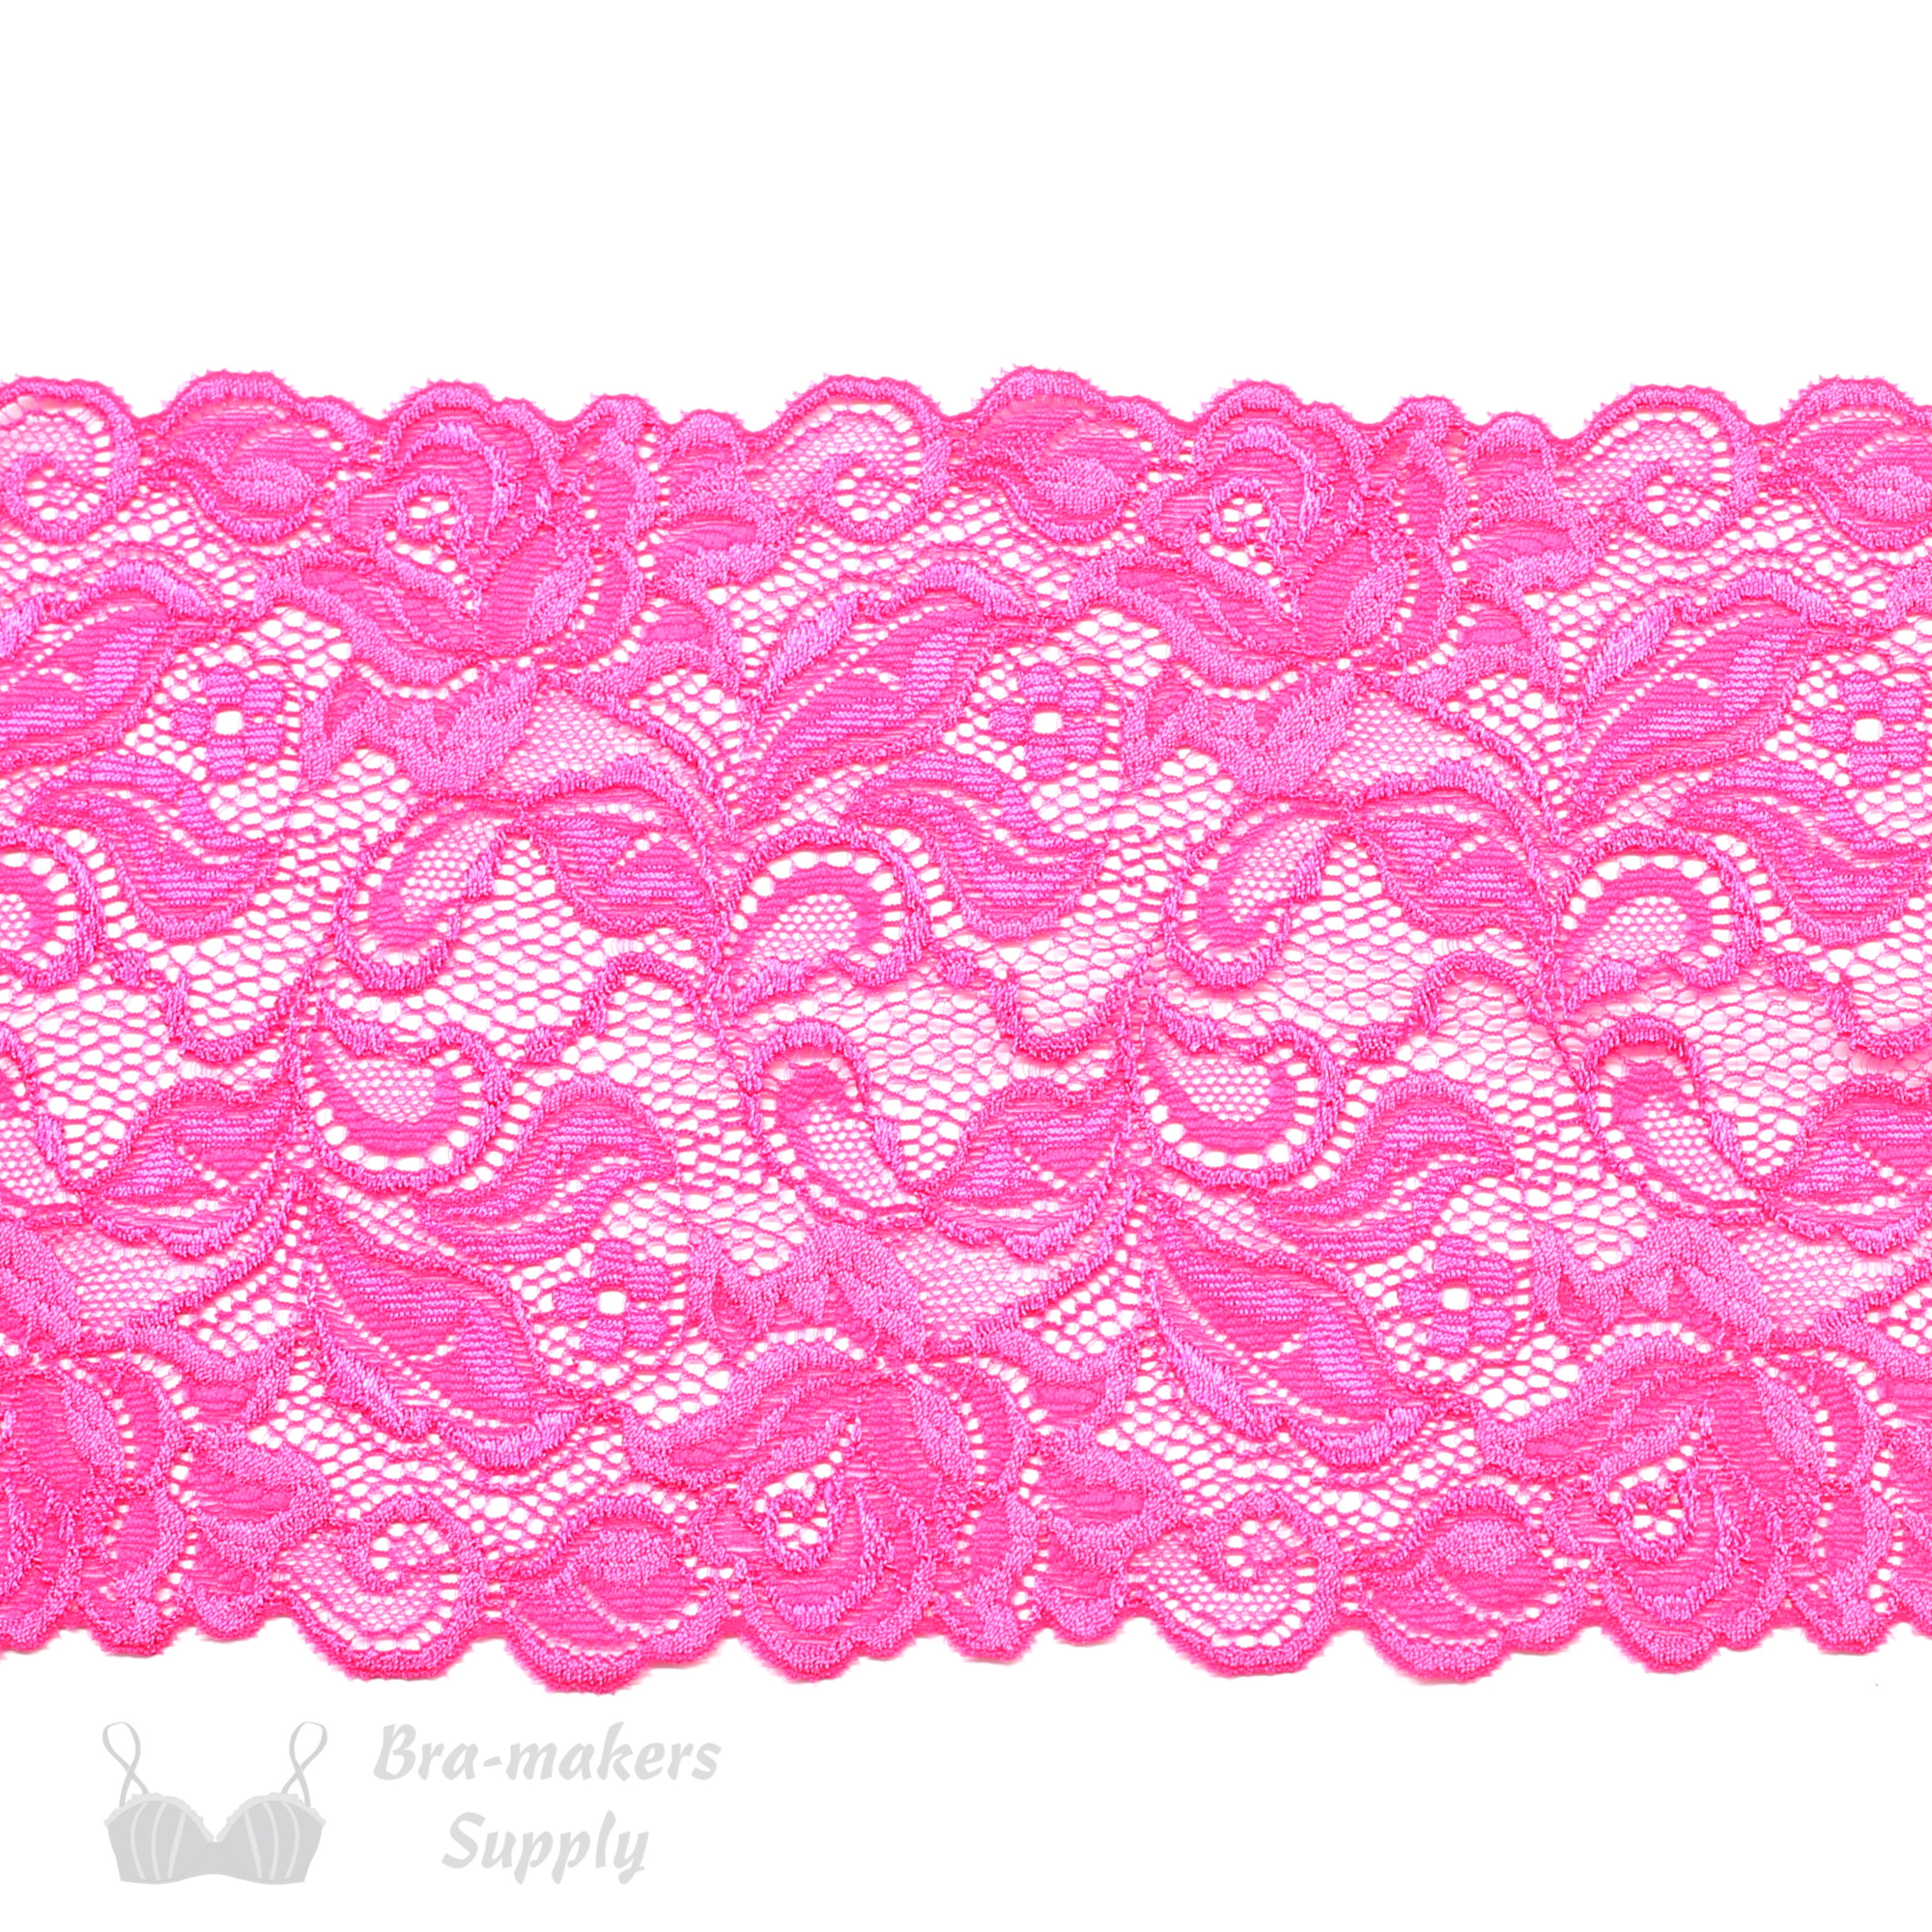 Six Inch Candy Pink Floral Stretch Lace - Bra-makers Supply